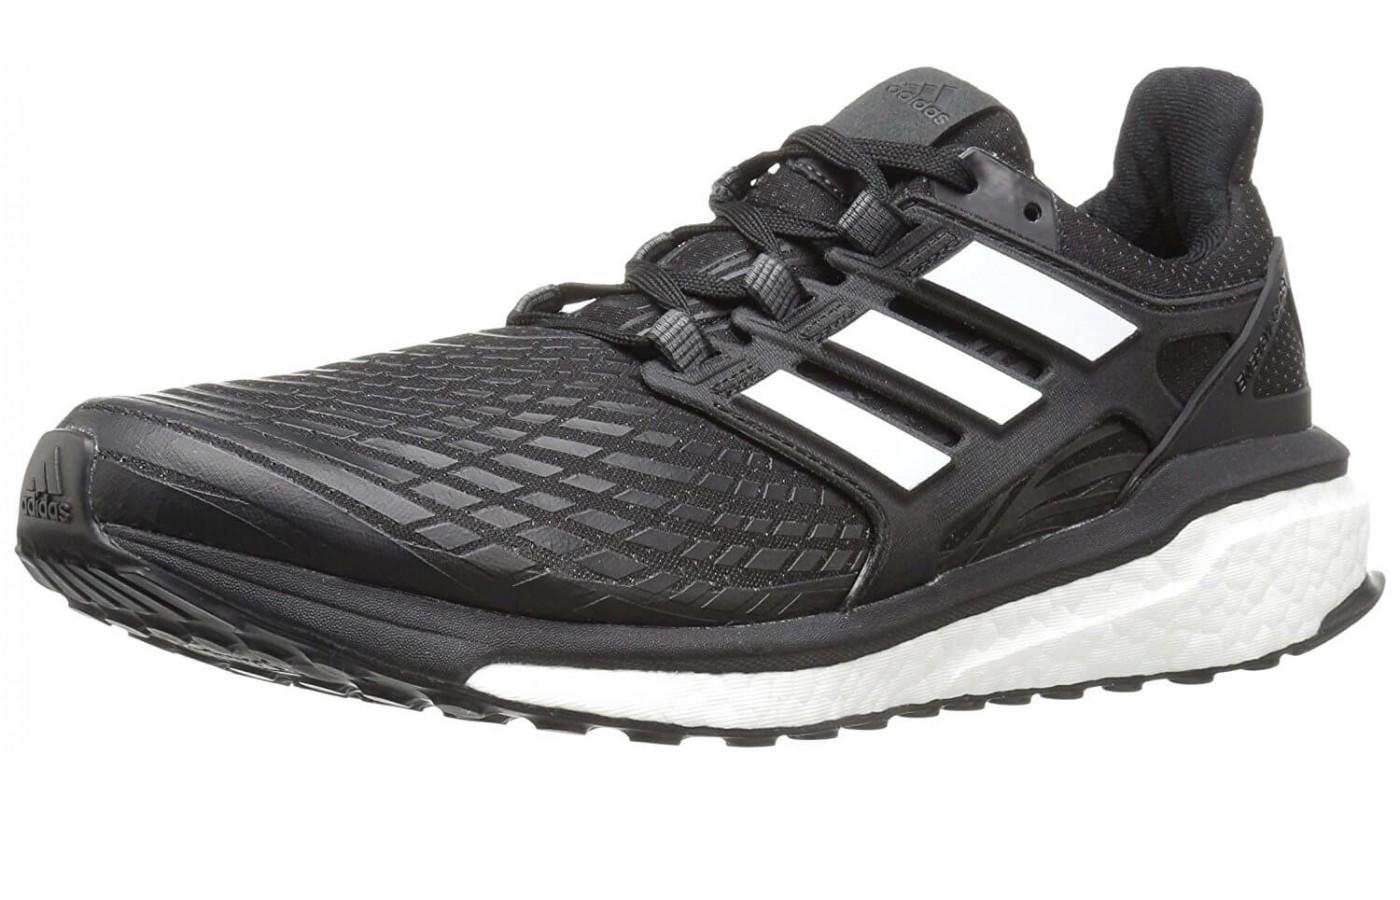 Adidas Energy Boost RunnerClick